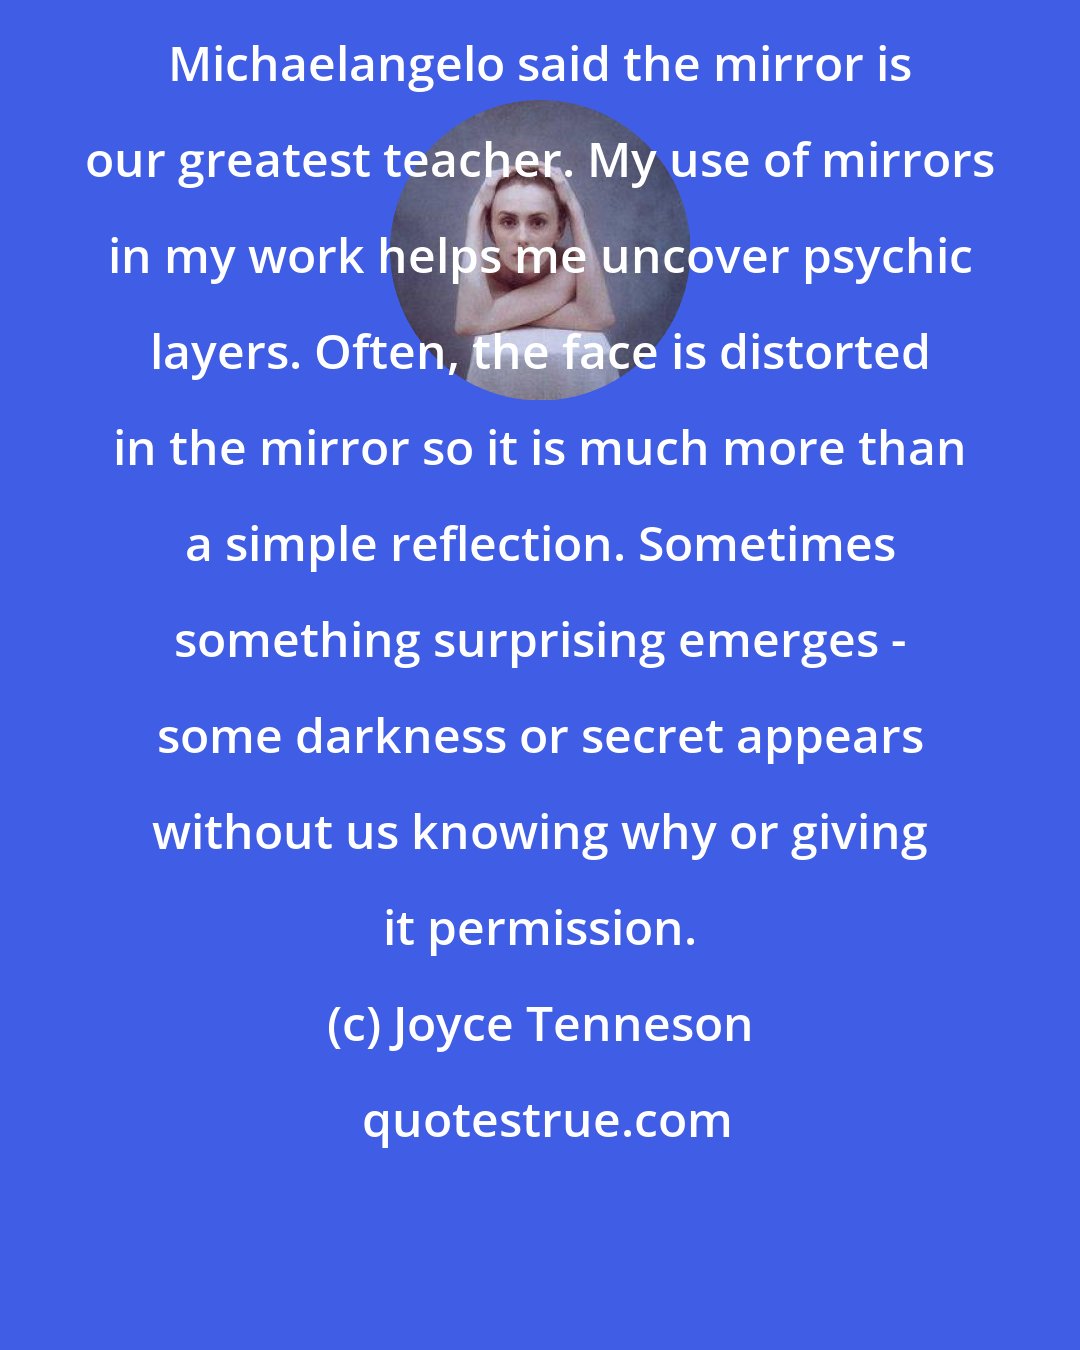 Joyce Tenneson: Michaelangelo said the mirror is our greatest teacher. My use of mirrors in my work helps me uncover psychic layers. Often, the face is distorted in the mirror so it is much more than a simple reflection. Sometimes something surprising emerges - some darkness or secret appears without us knowing why or giving it permission.